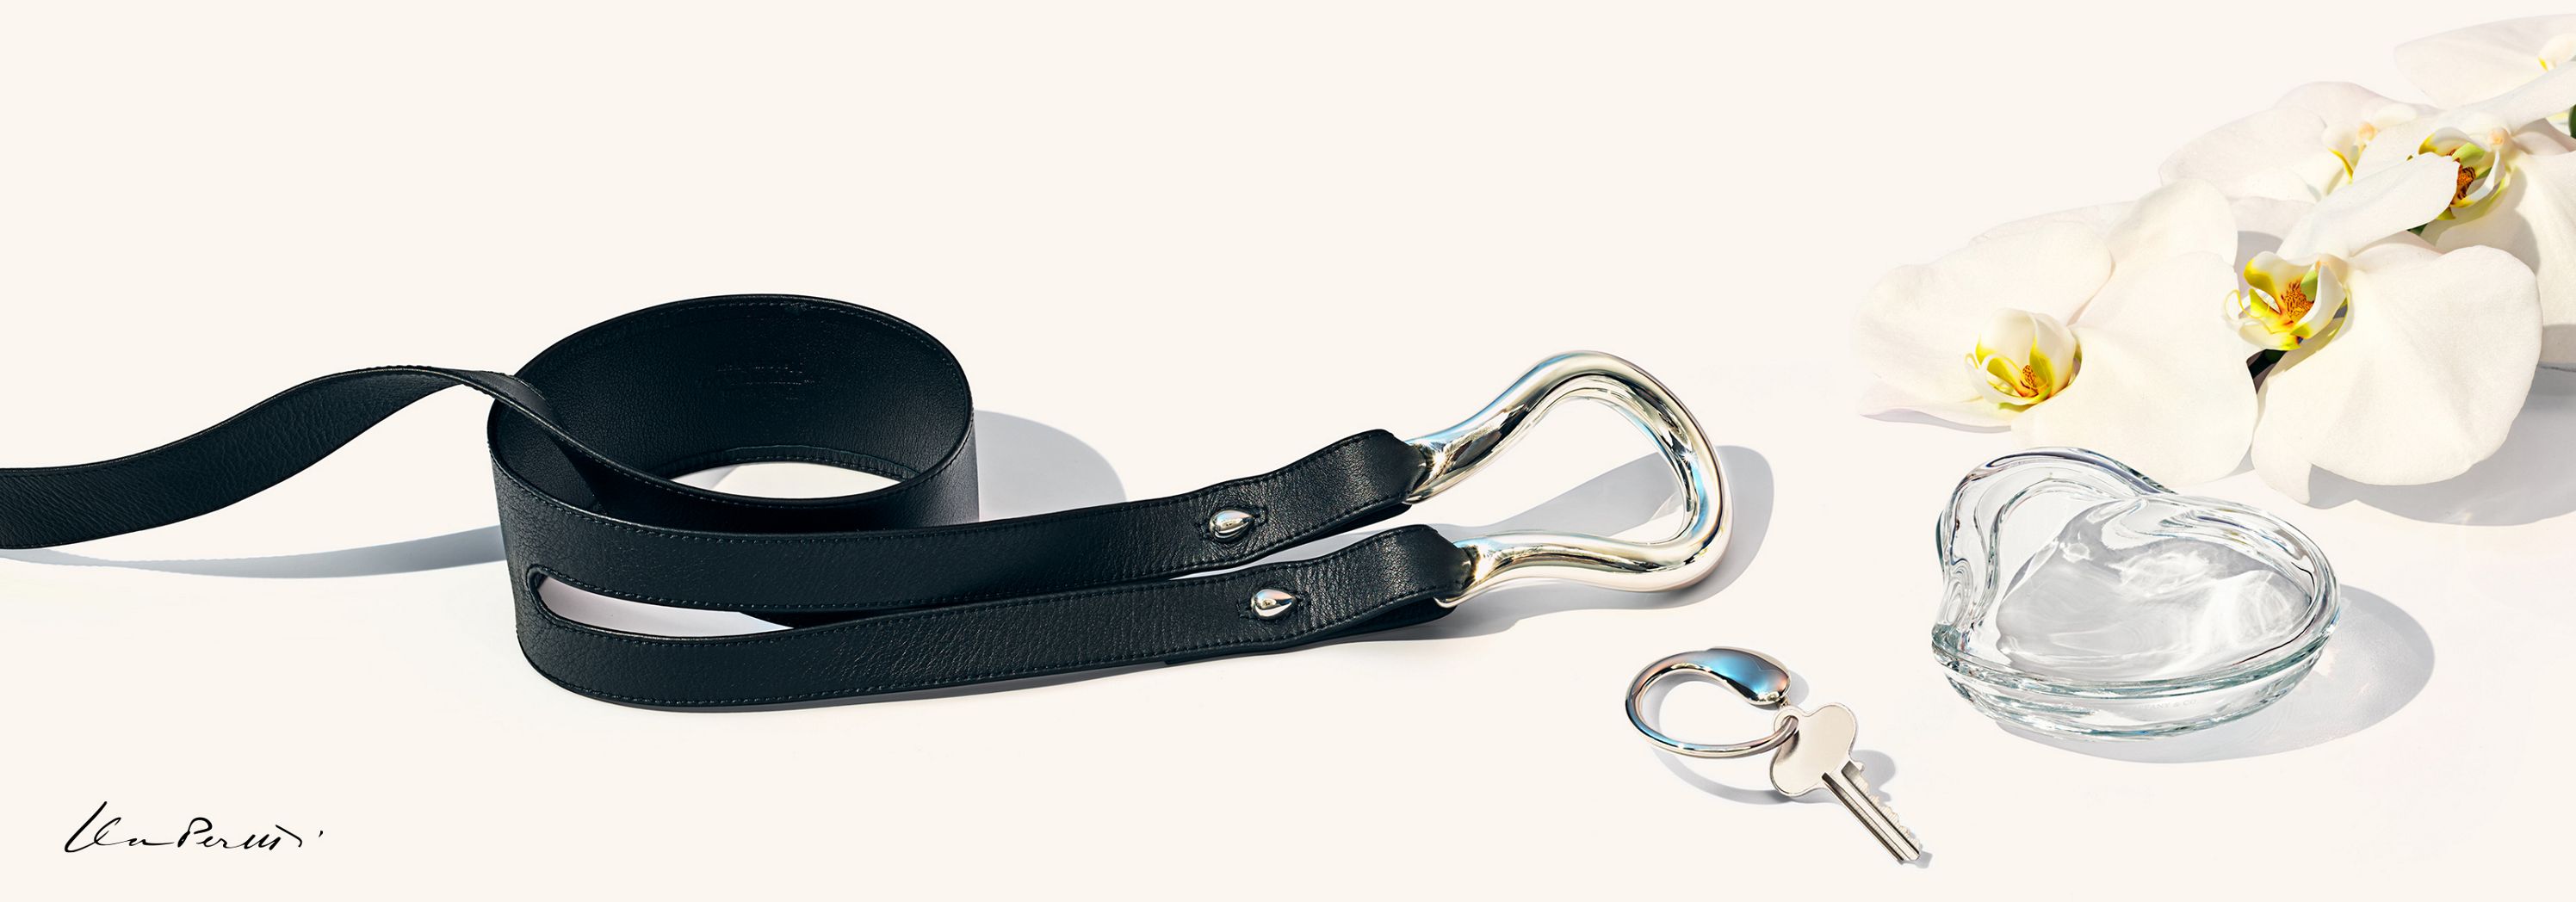 Shop Tiffany & Co Pet Supplies by 7minds